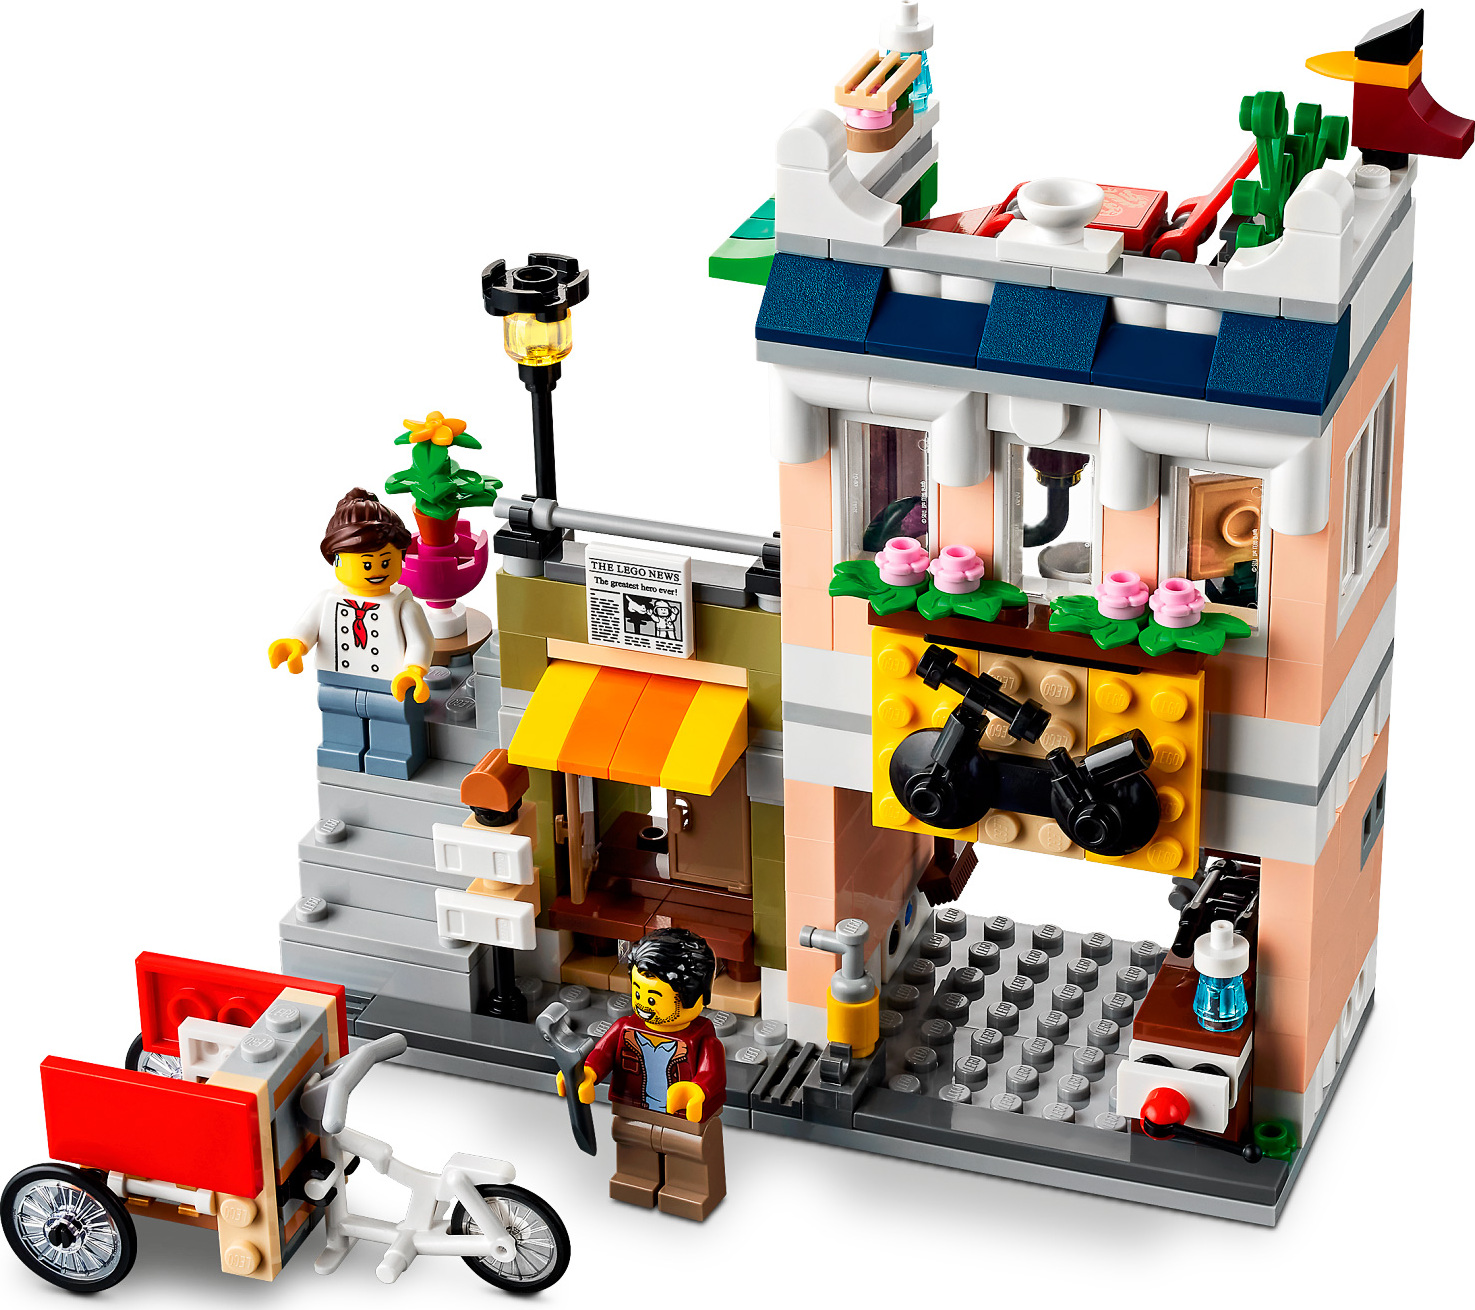 LEGO Creator 3 in 1 Downtown Noodle Shop House, Transforms from Noodle Shop  to Bike Shop to Arcade, Modular Building Set, Toy Gift for Kids 8 Years